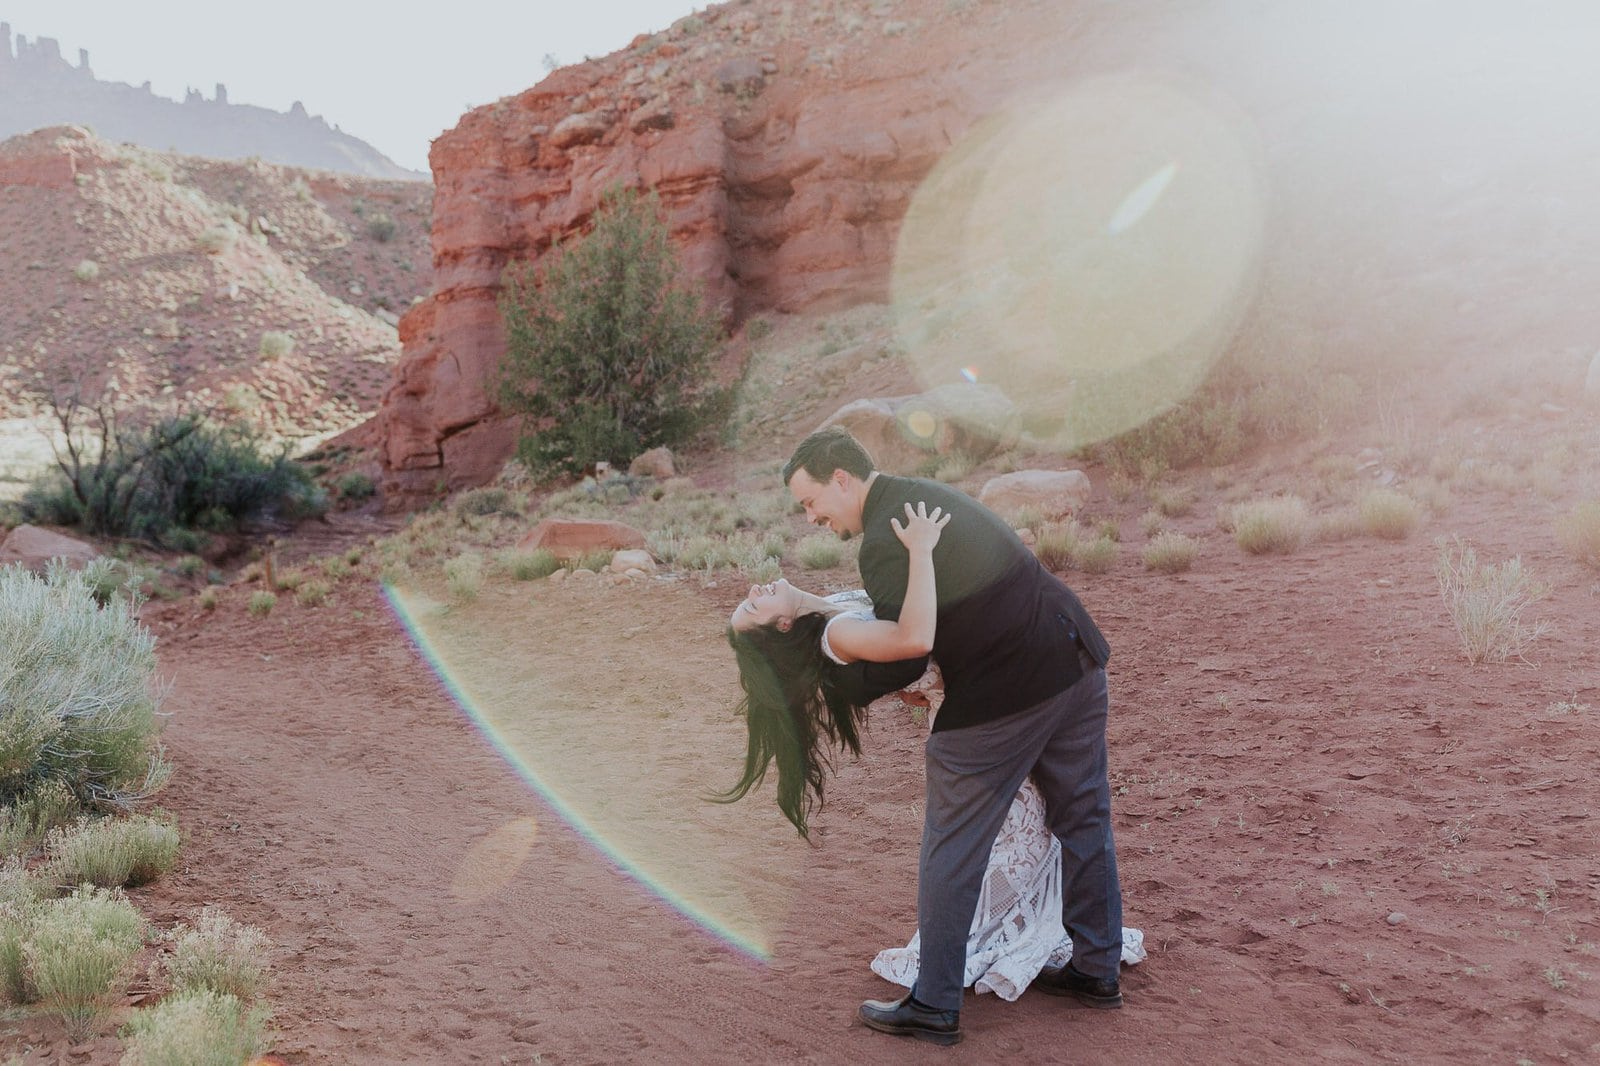 Groom dips his bride during elopement photo session.